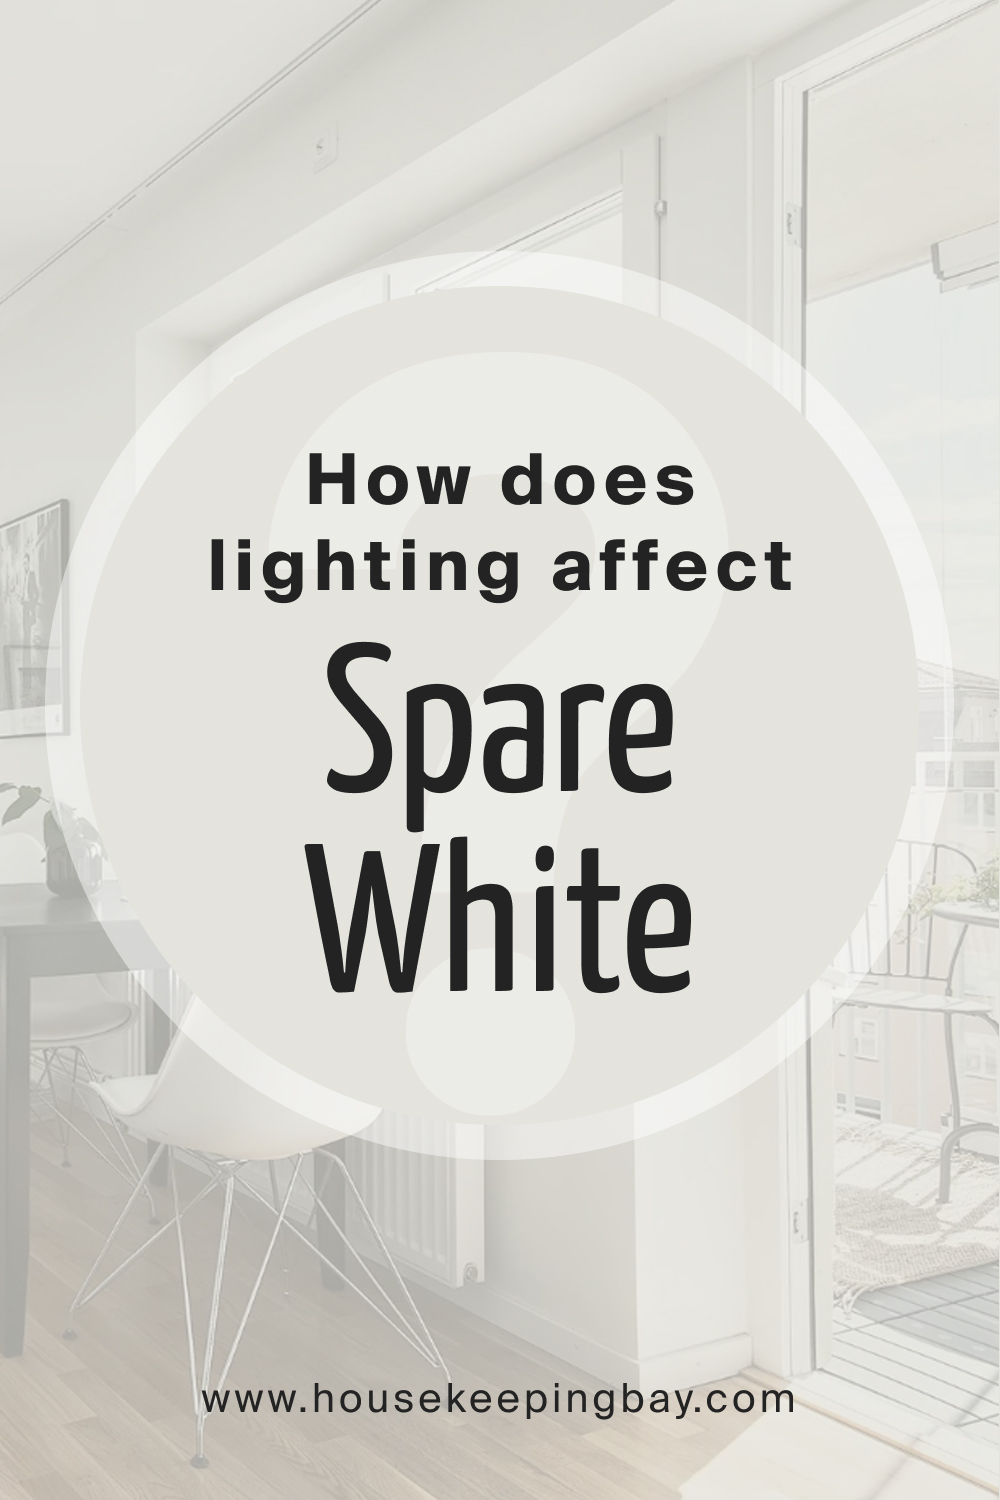 How does lighting affect SW Spare White